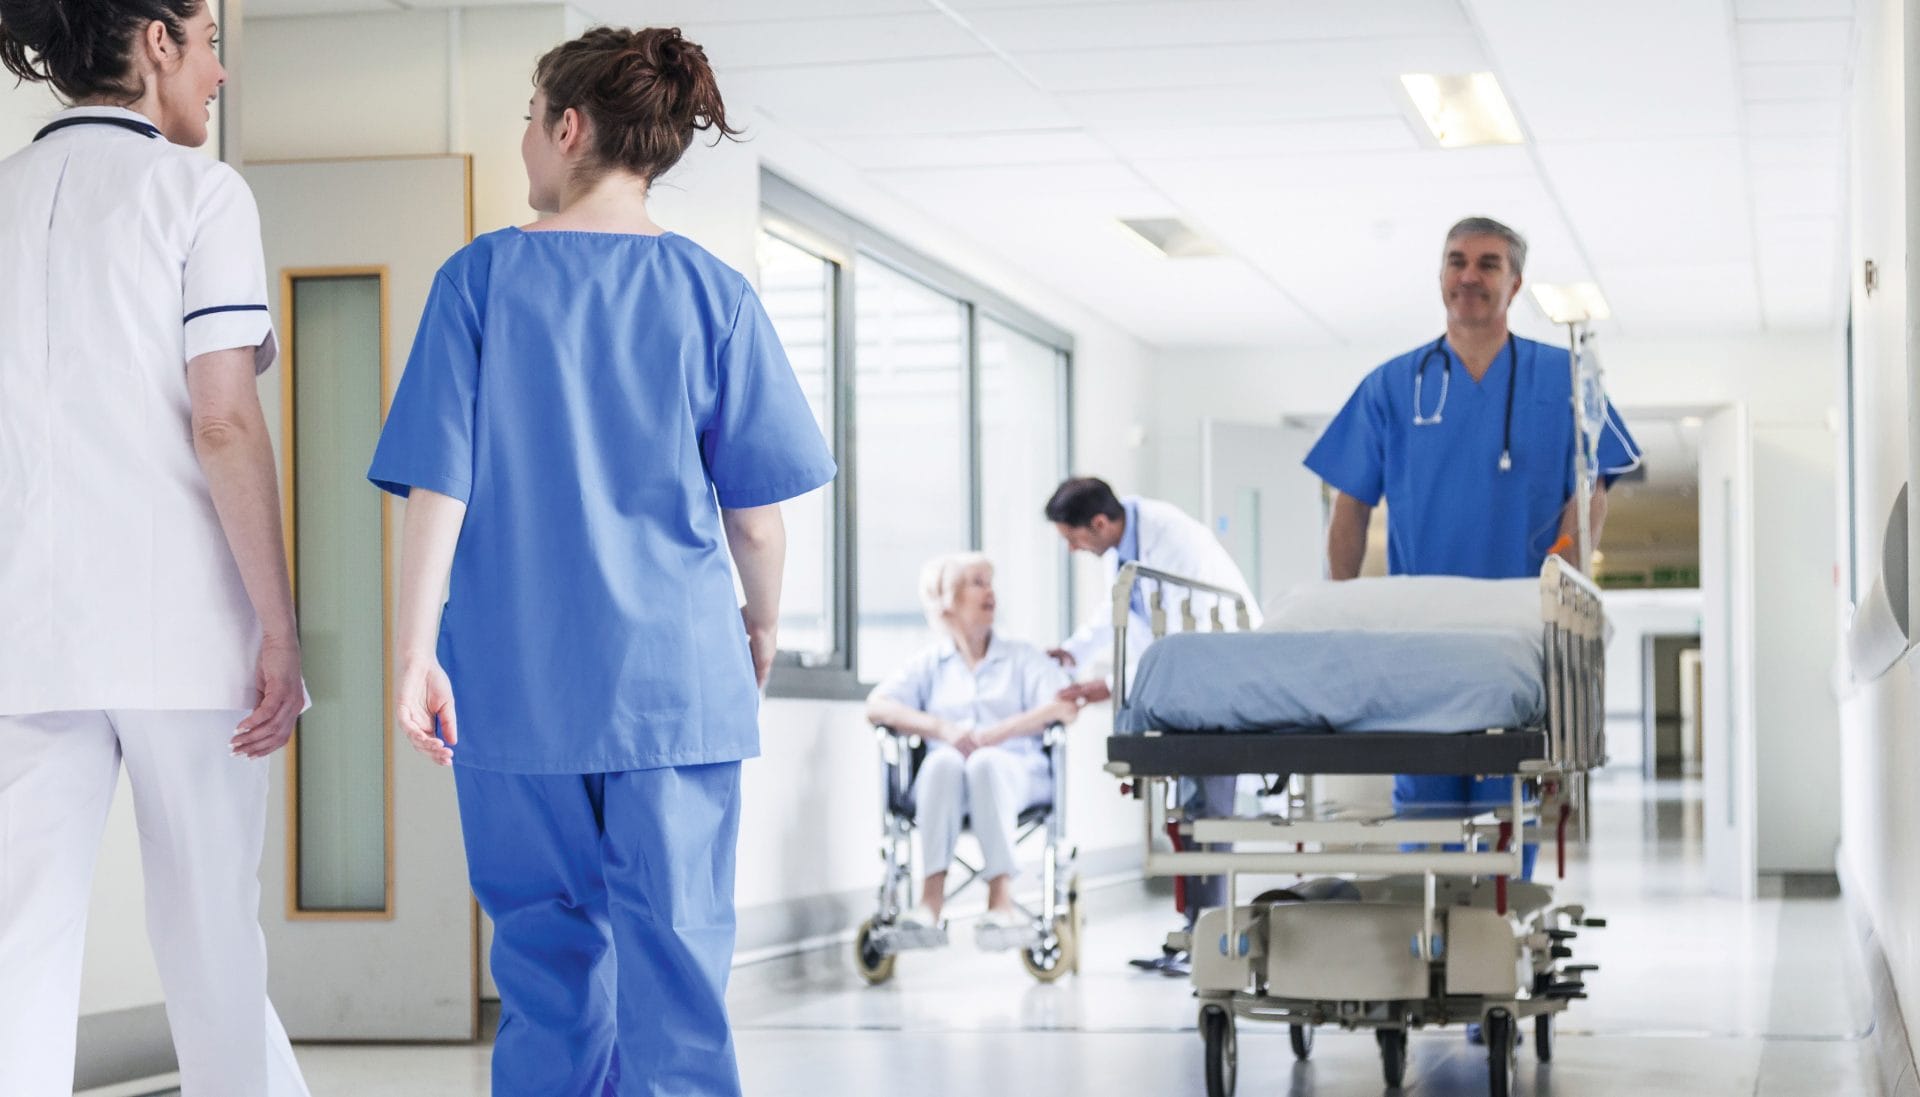 Fire protection and airflow control to help minimize risk in healthcare facilities